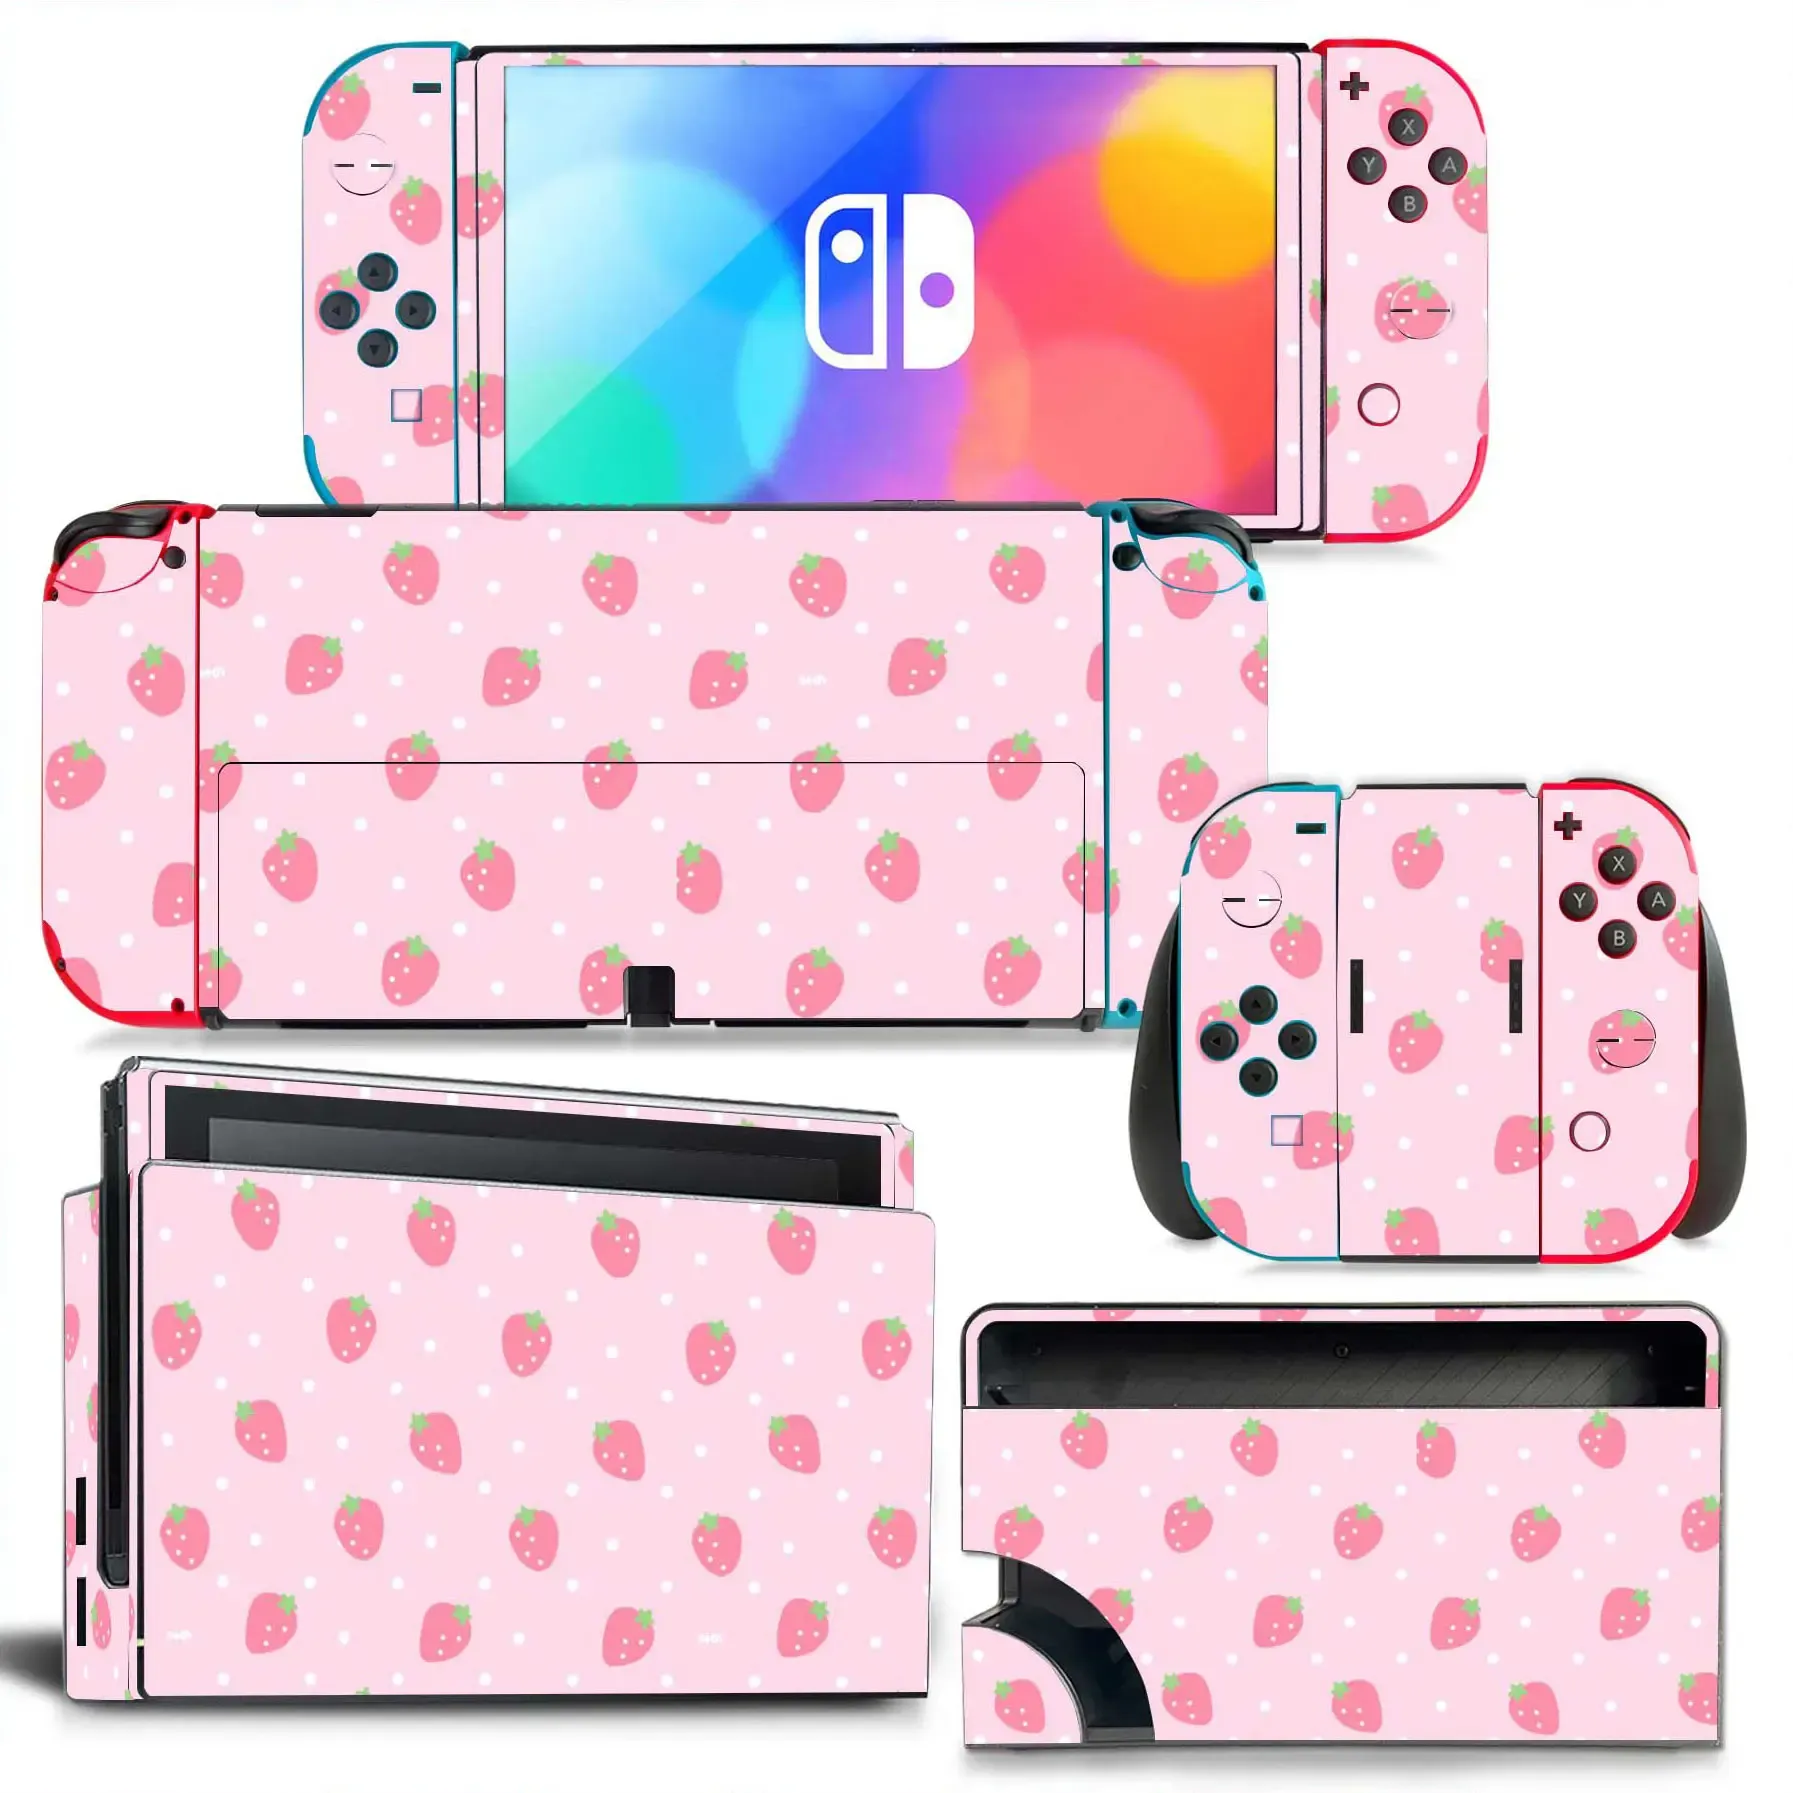 Stickers Strawberry Switch Oled Skin Sticker Decal Cover for Switch Oled Console Dock Wrap Full Wrap Skin NS OLED Viny